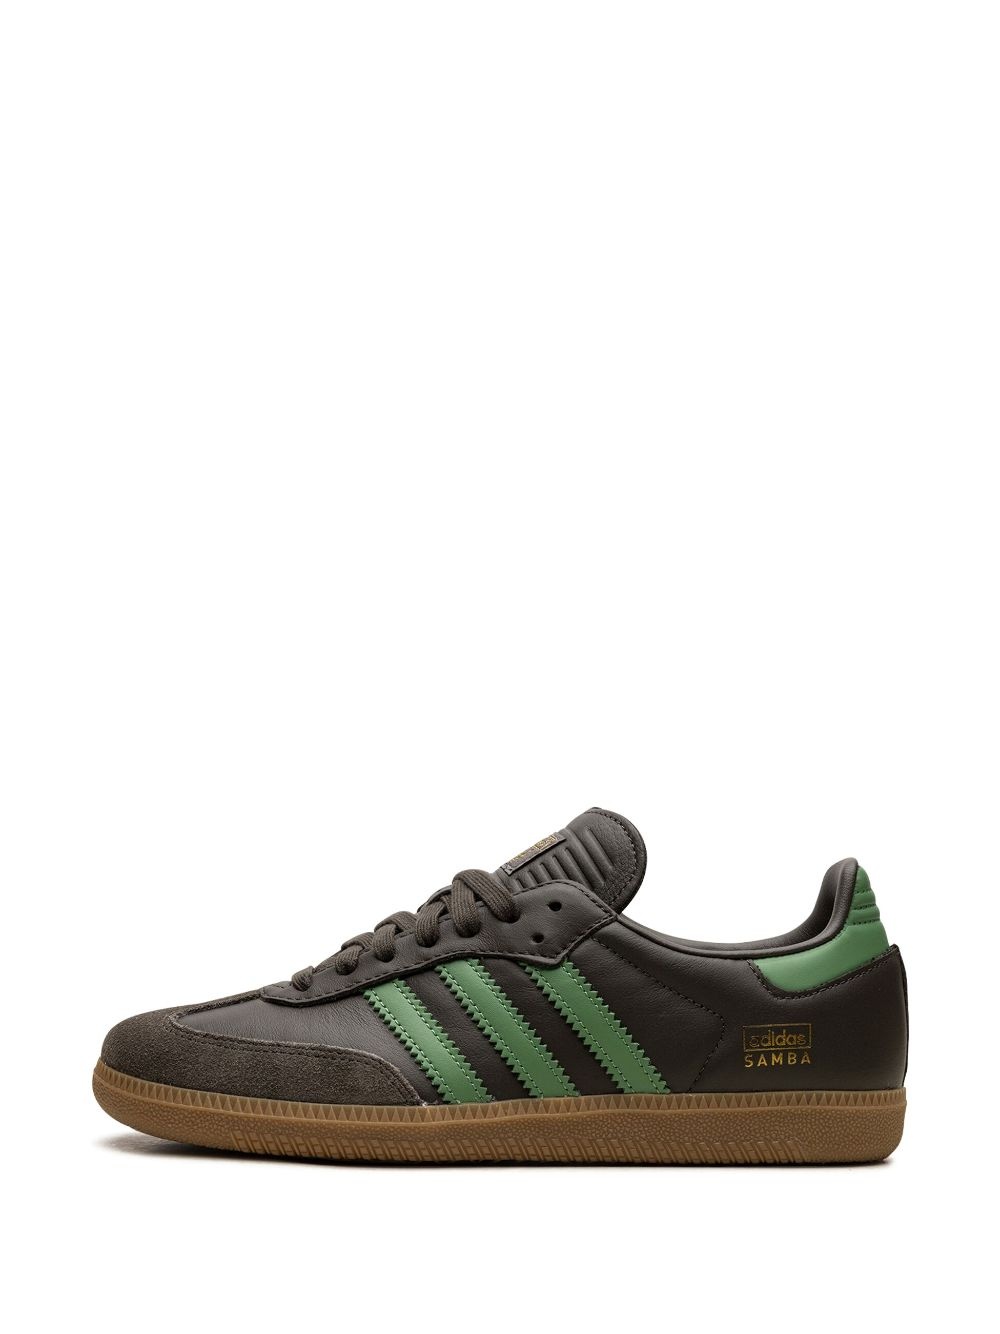 5 "Green and Brown" sneakers - 6